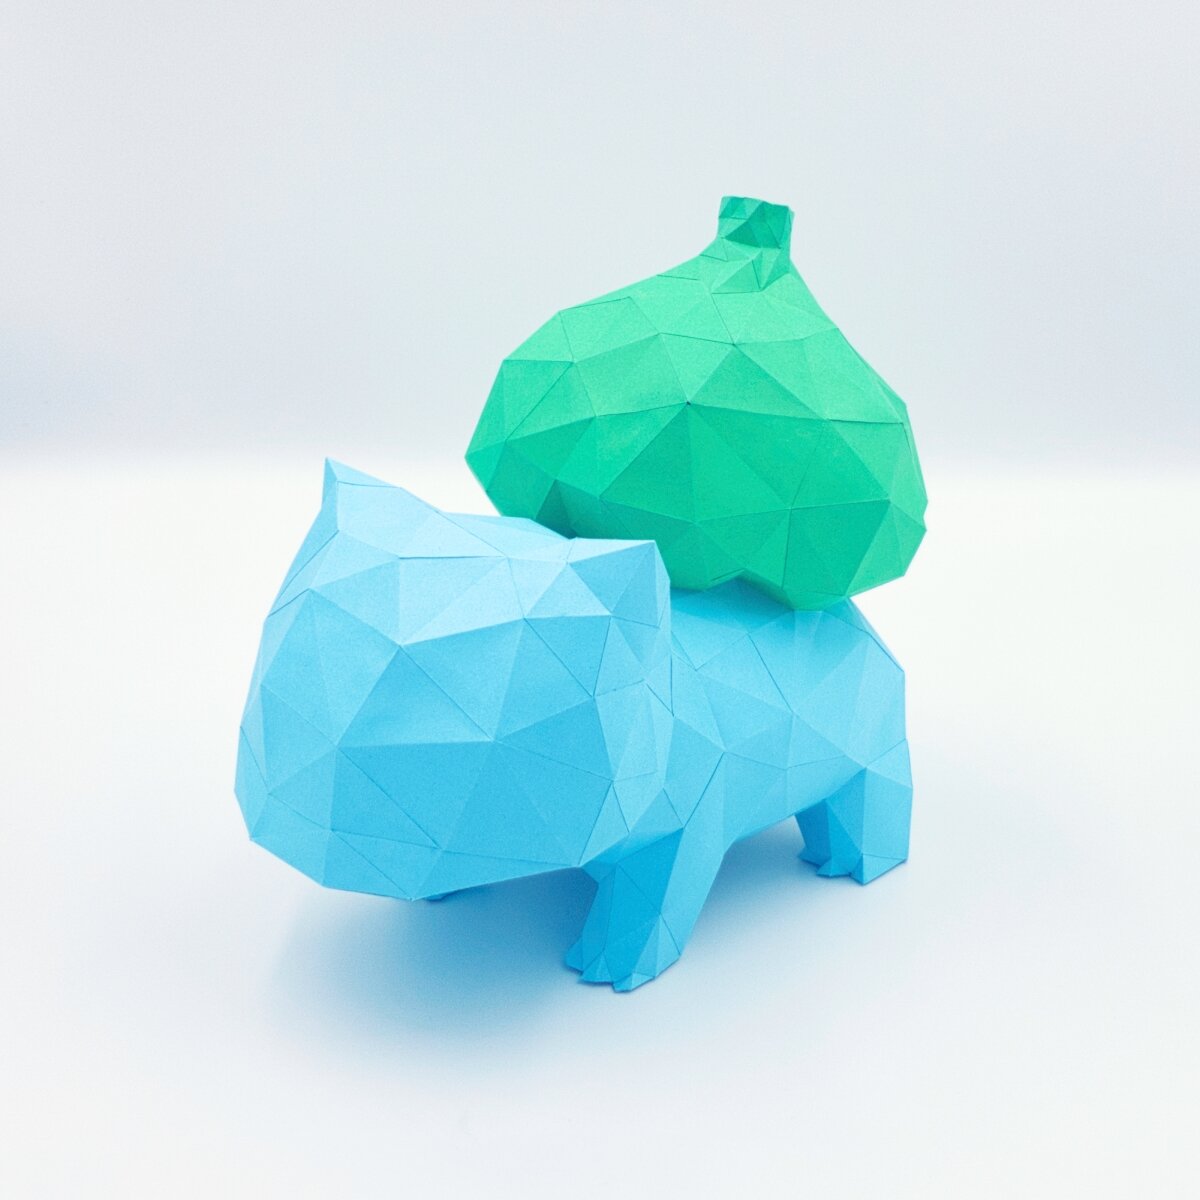 Optimized-Bulbasaur - Frontleft - Square.png